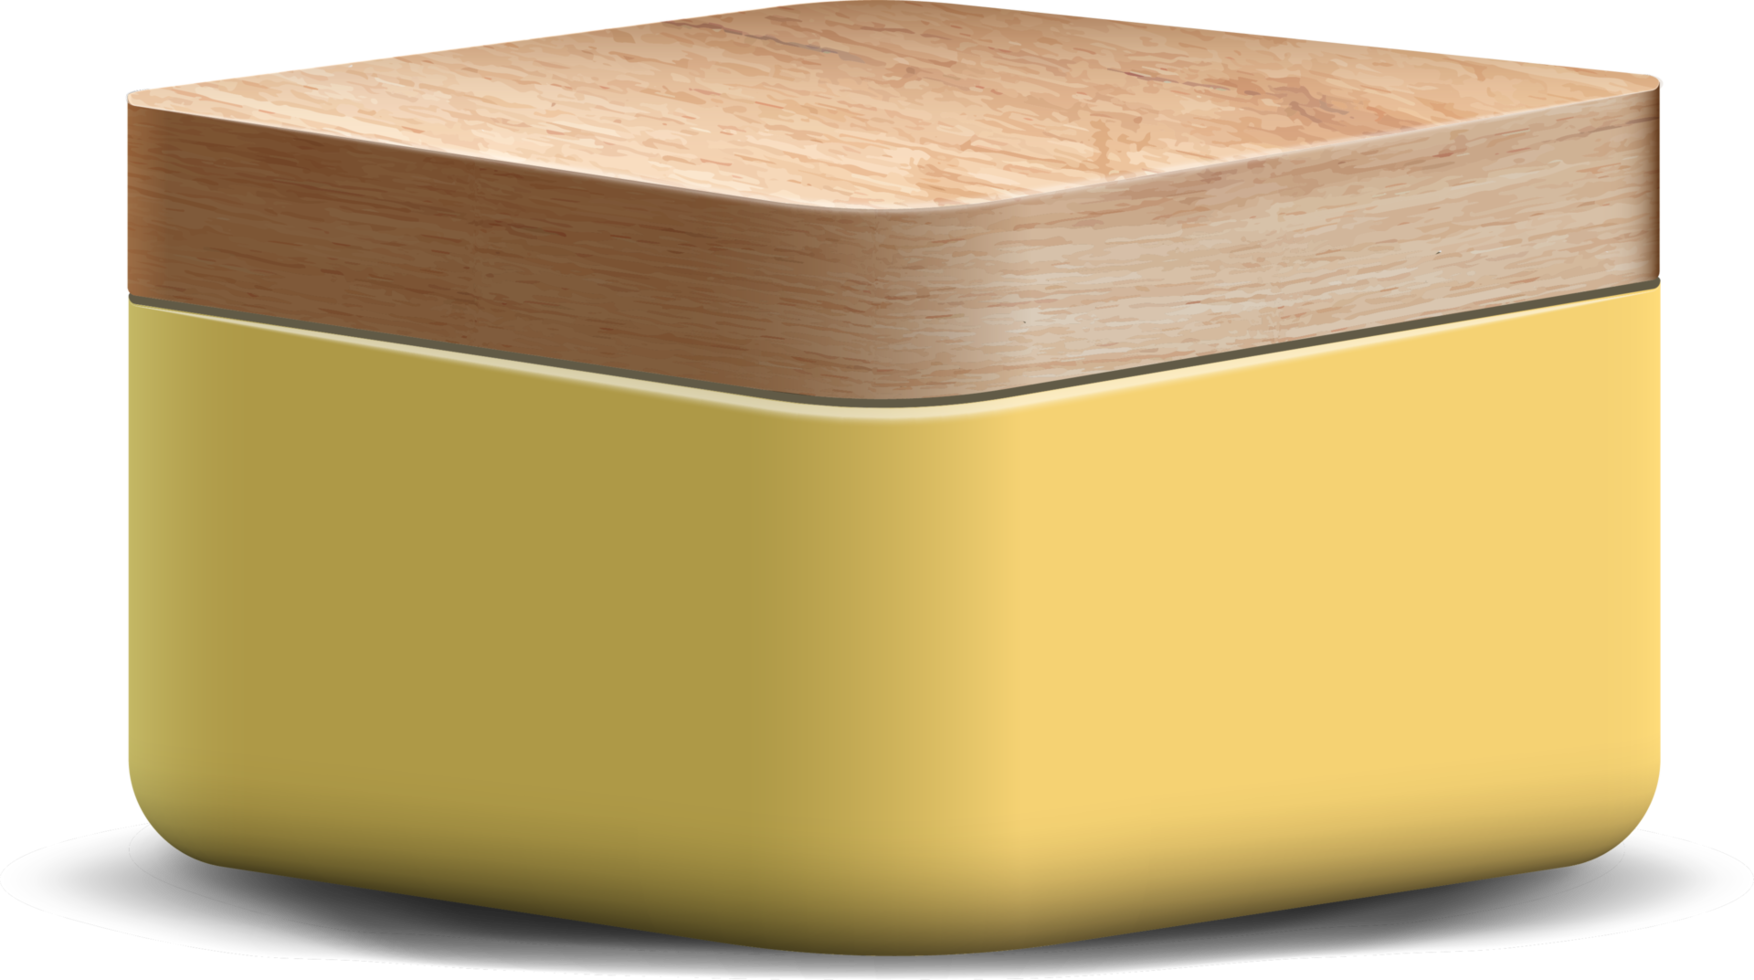 Yellow and wood realistic 3D square pedestal podium for stand show product display. png